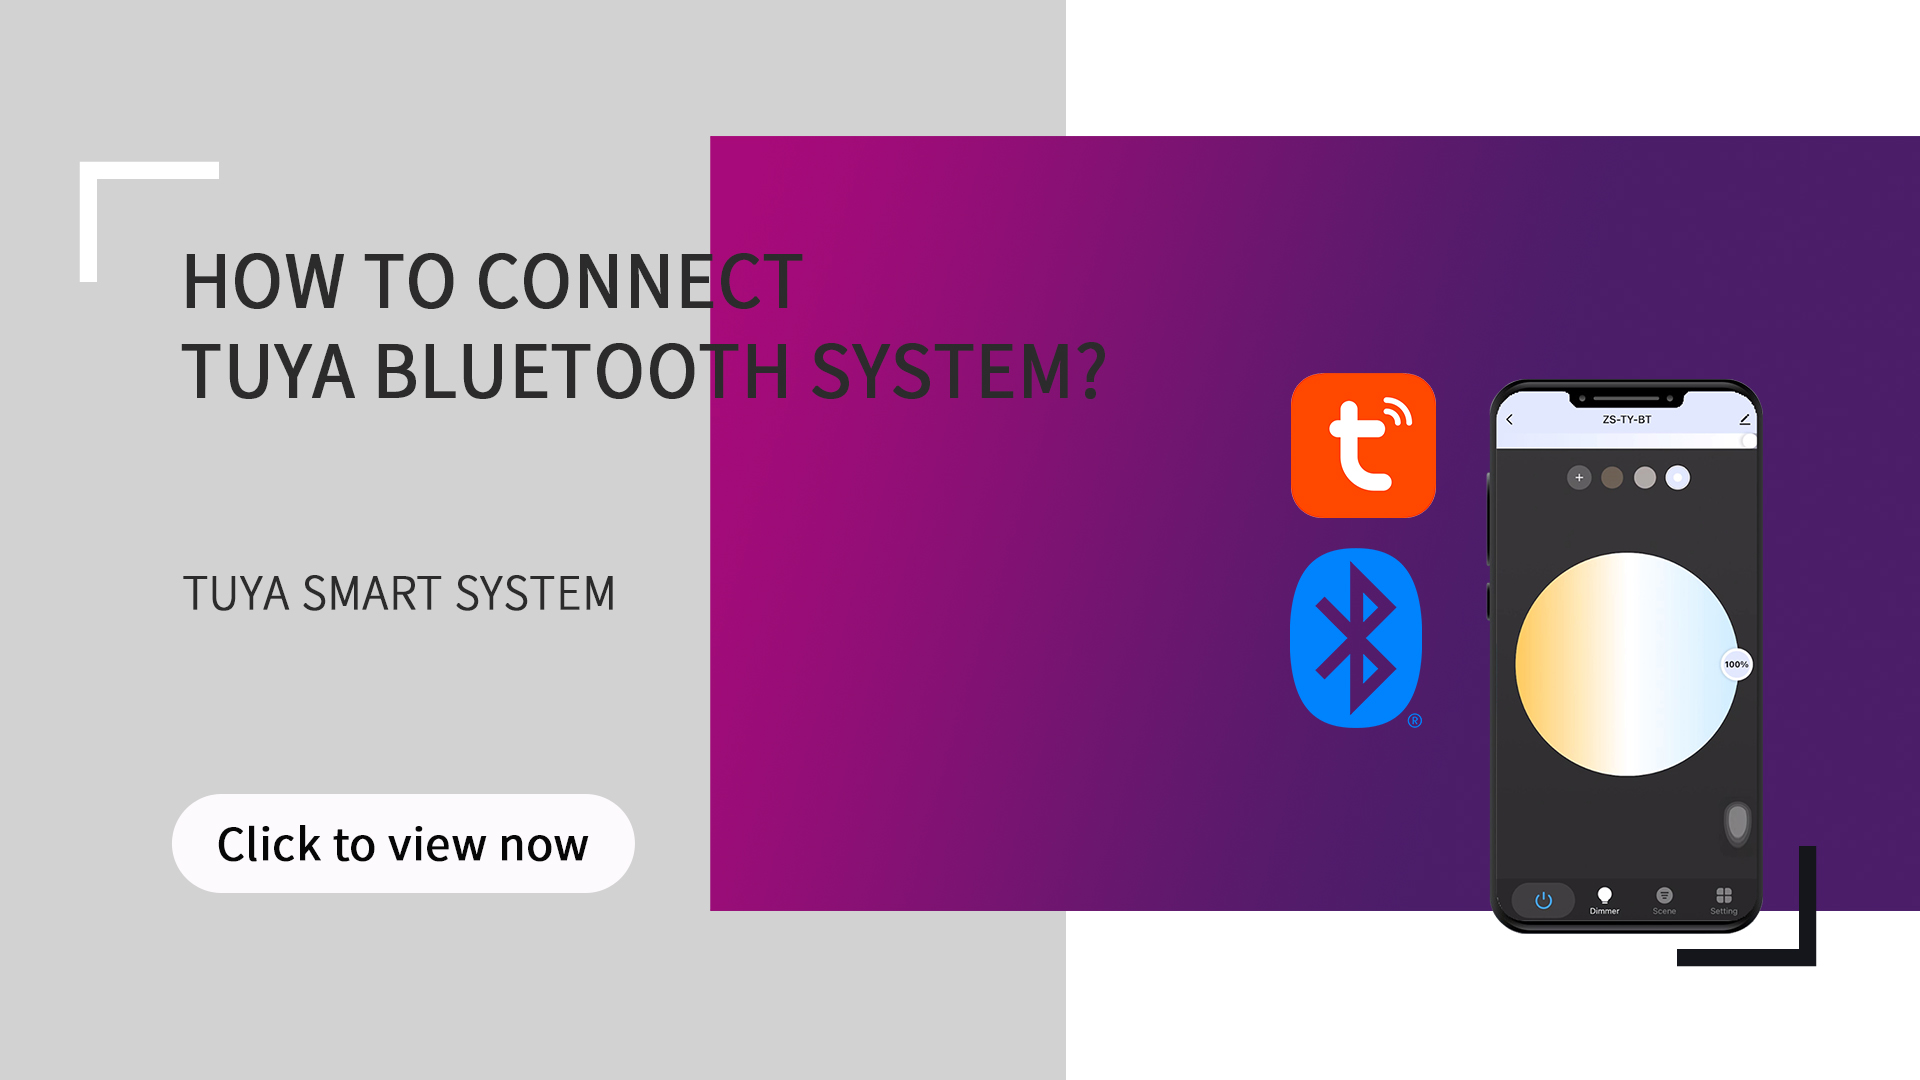 How to connect tuya Bluetooth system?